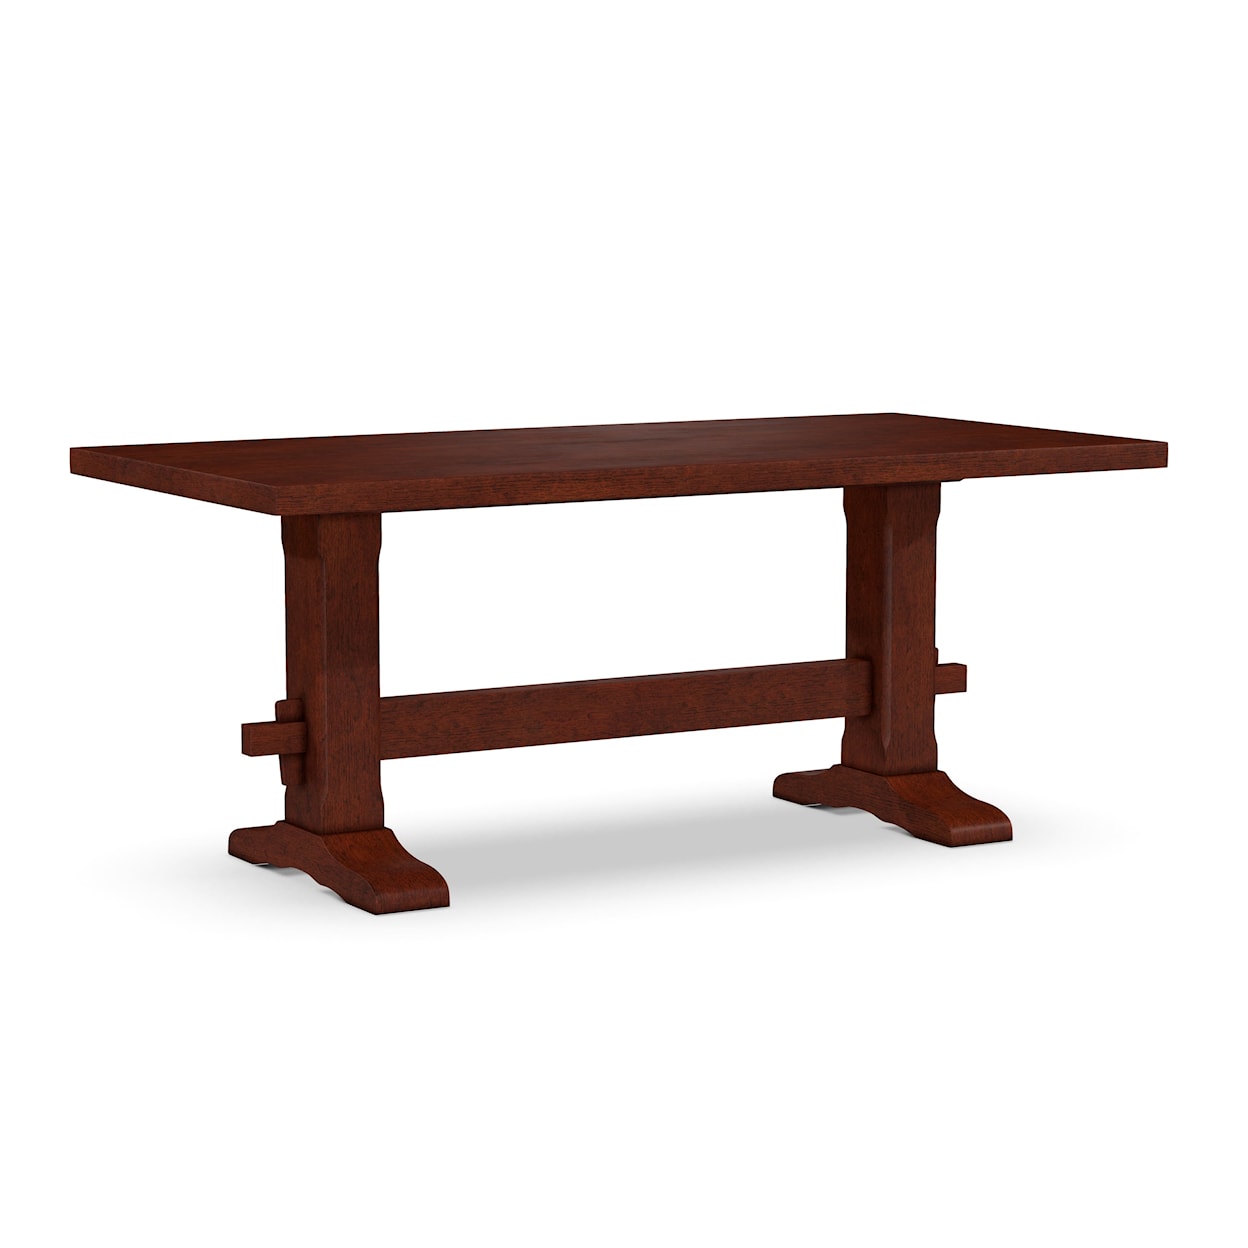 John Thomas SELECT Dining Room Trestle Solid Table Top w/Trestle Table Base